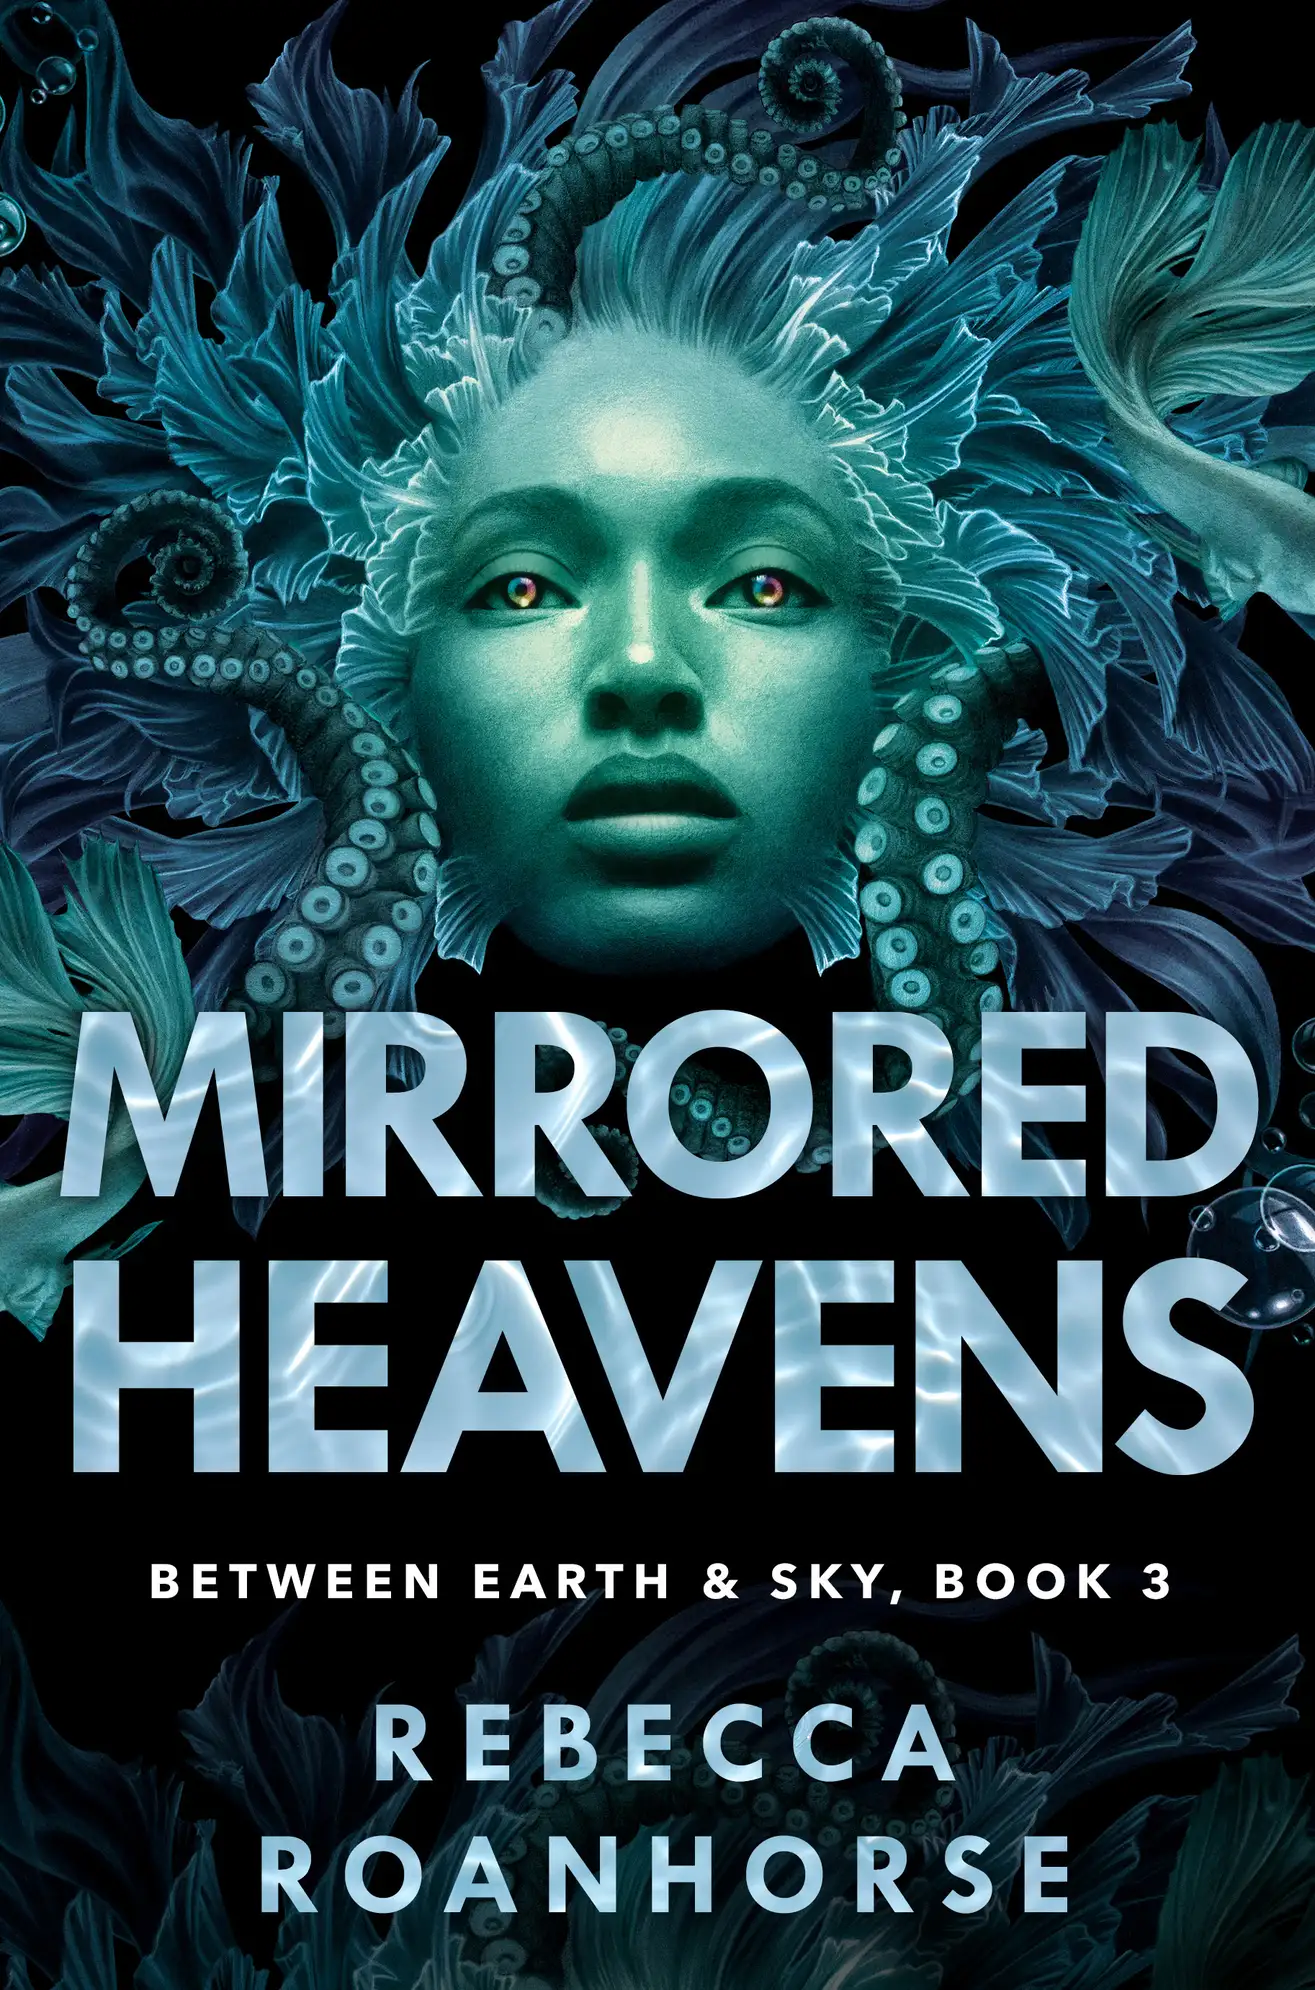 Image for "Mirrored Heavens"